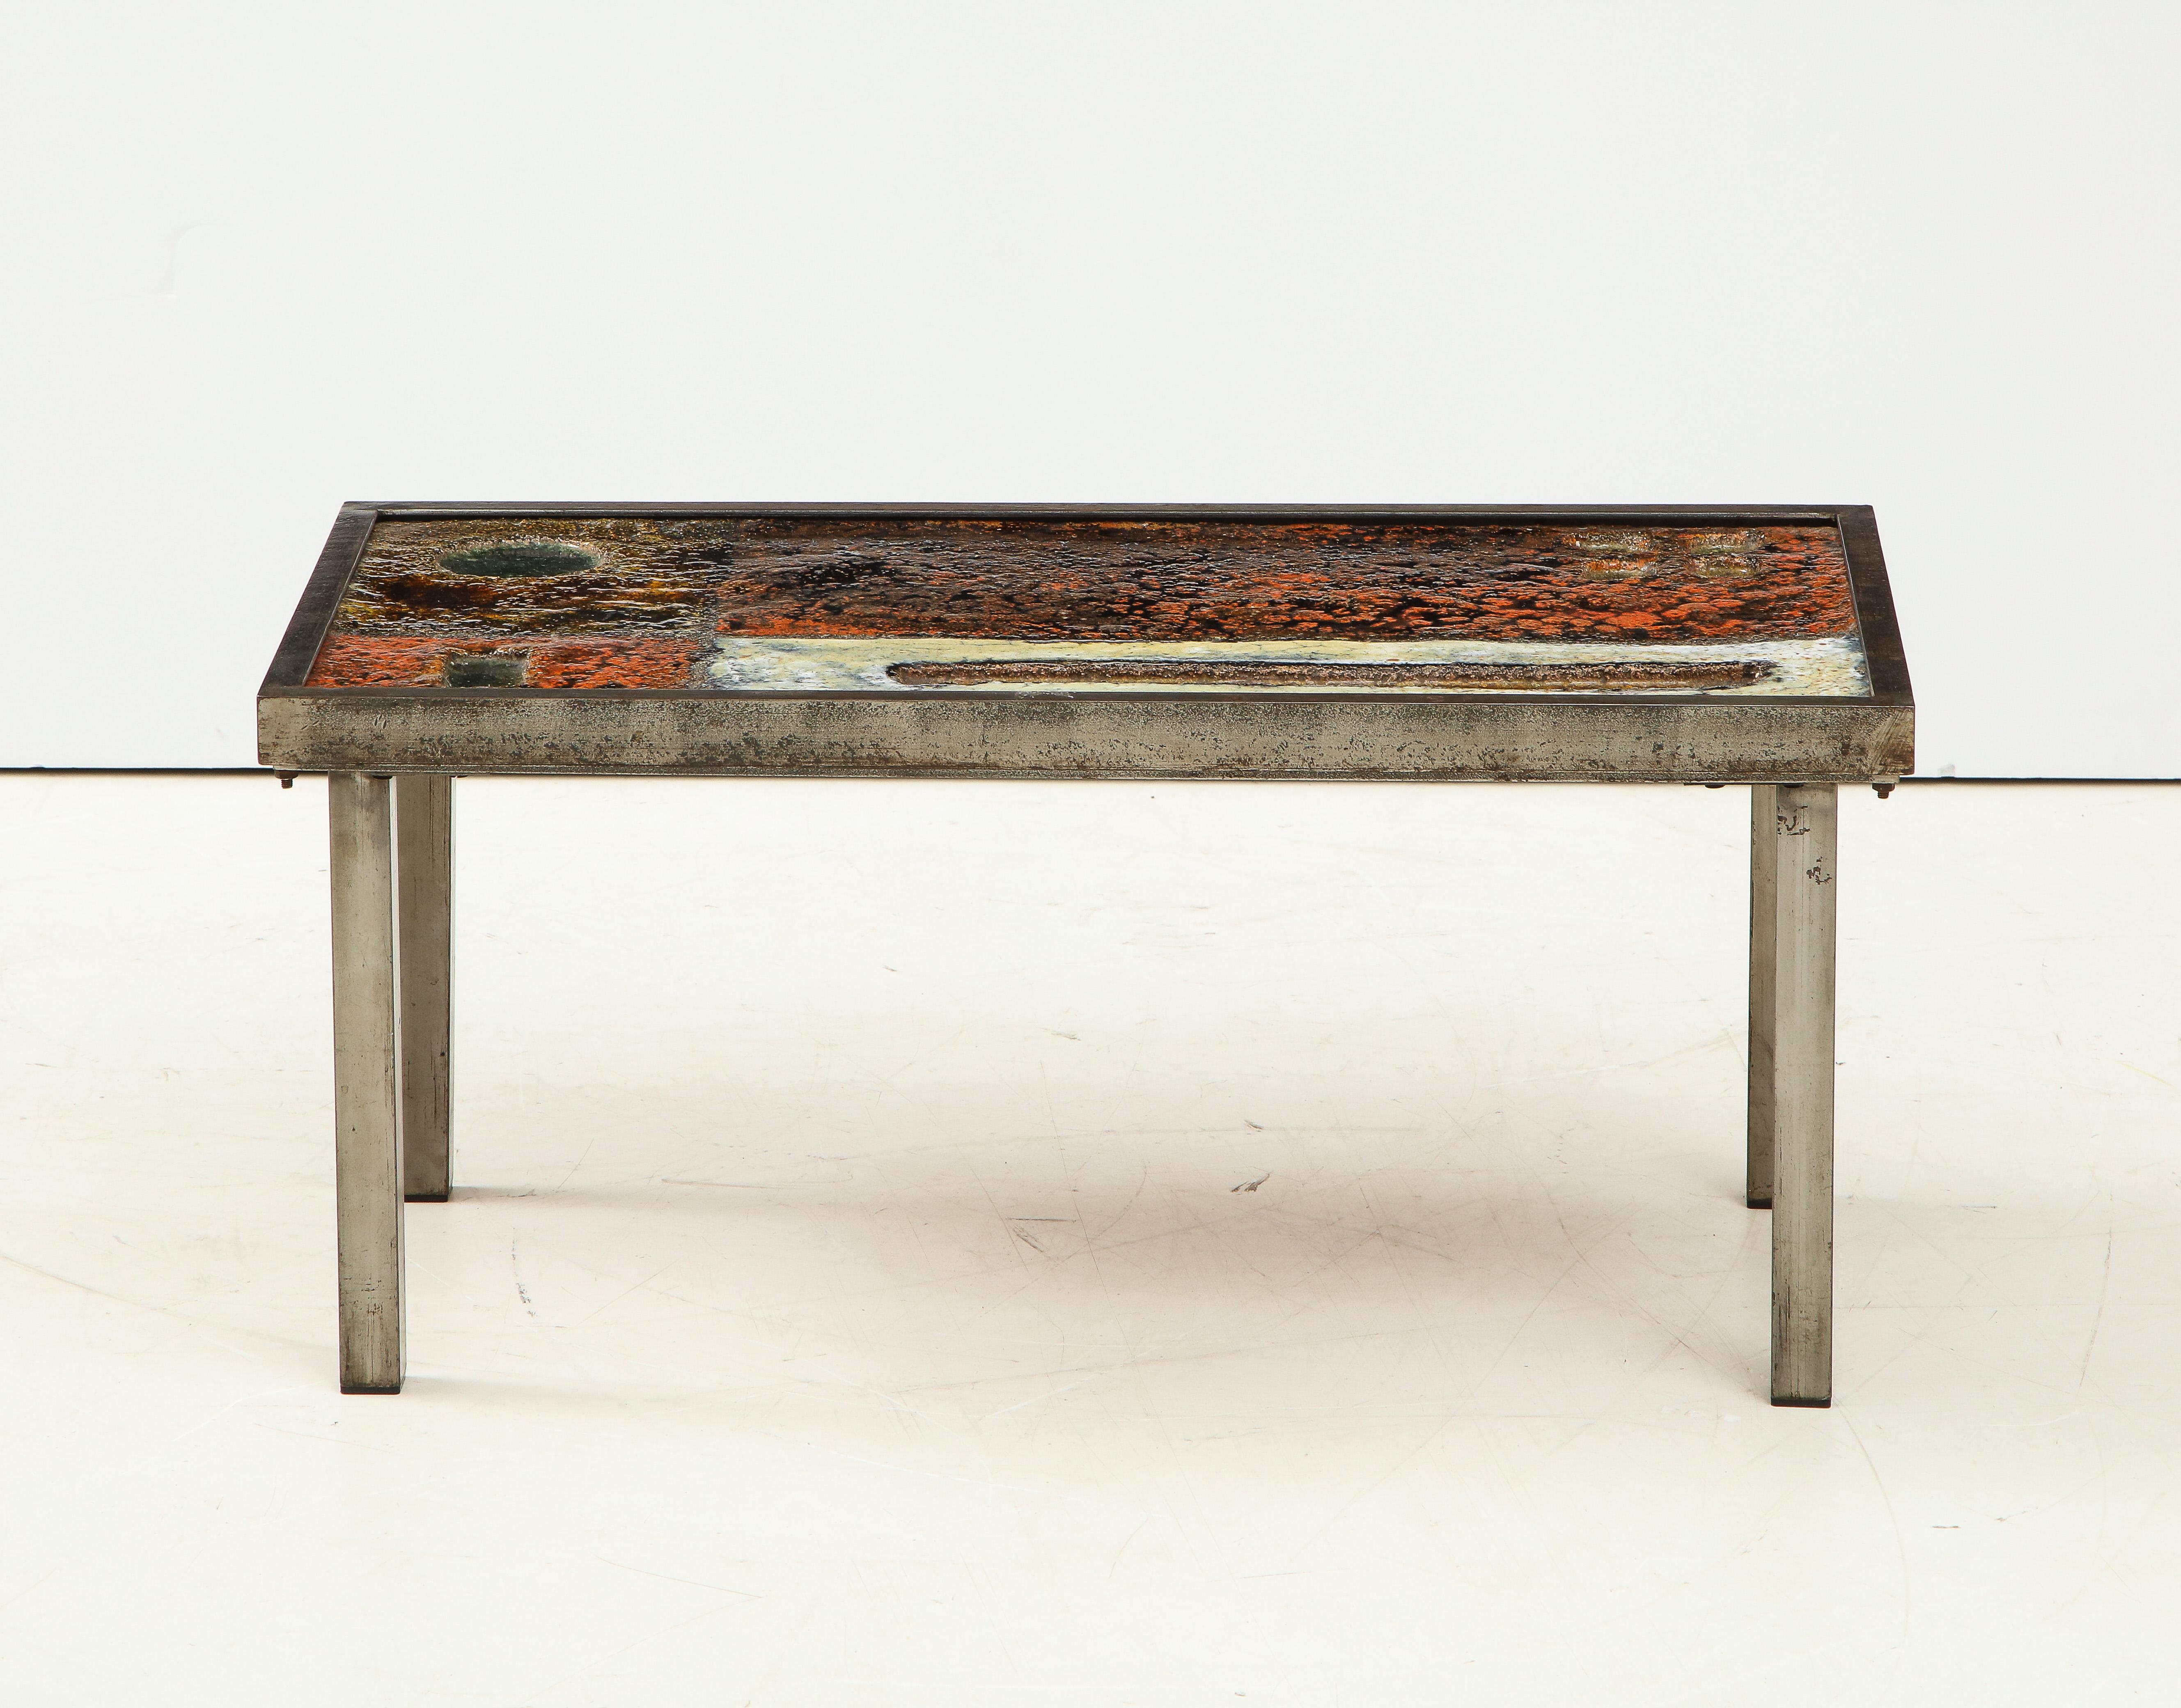 Rare low coffee table by Robert and Jean Cloutier, France, circa 1950. 

This coffee table consists of brushed steel legs and a stunning enameled lava top with an explosive design that invokes the painterly feats of Abstract Expressionism. Its warm,